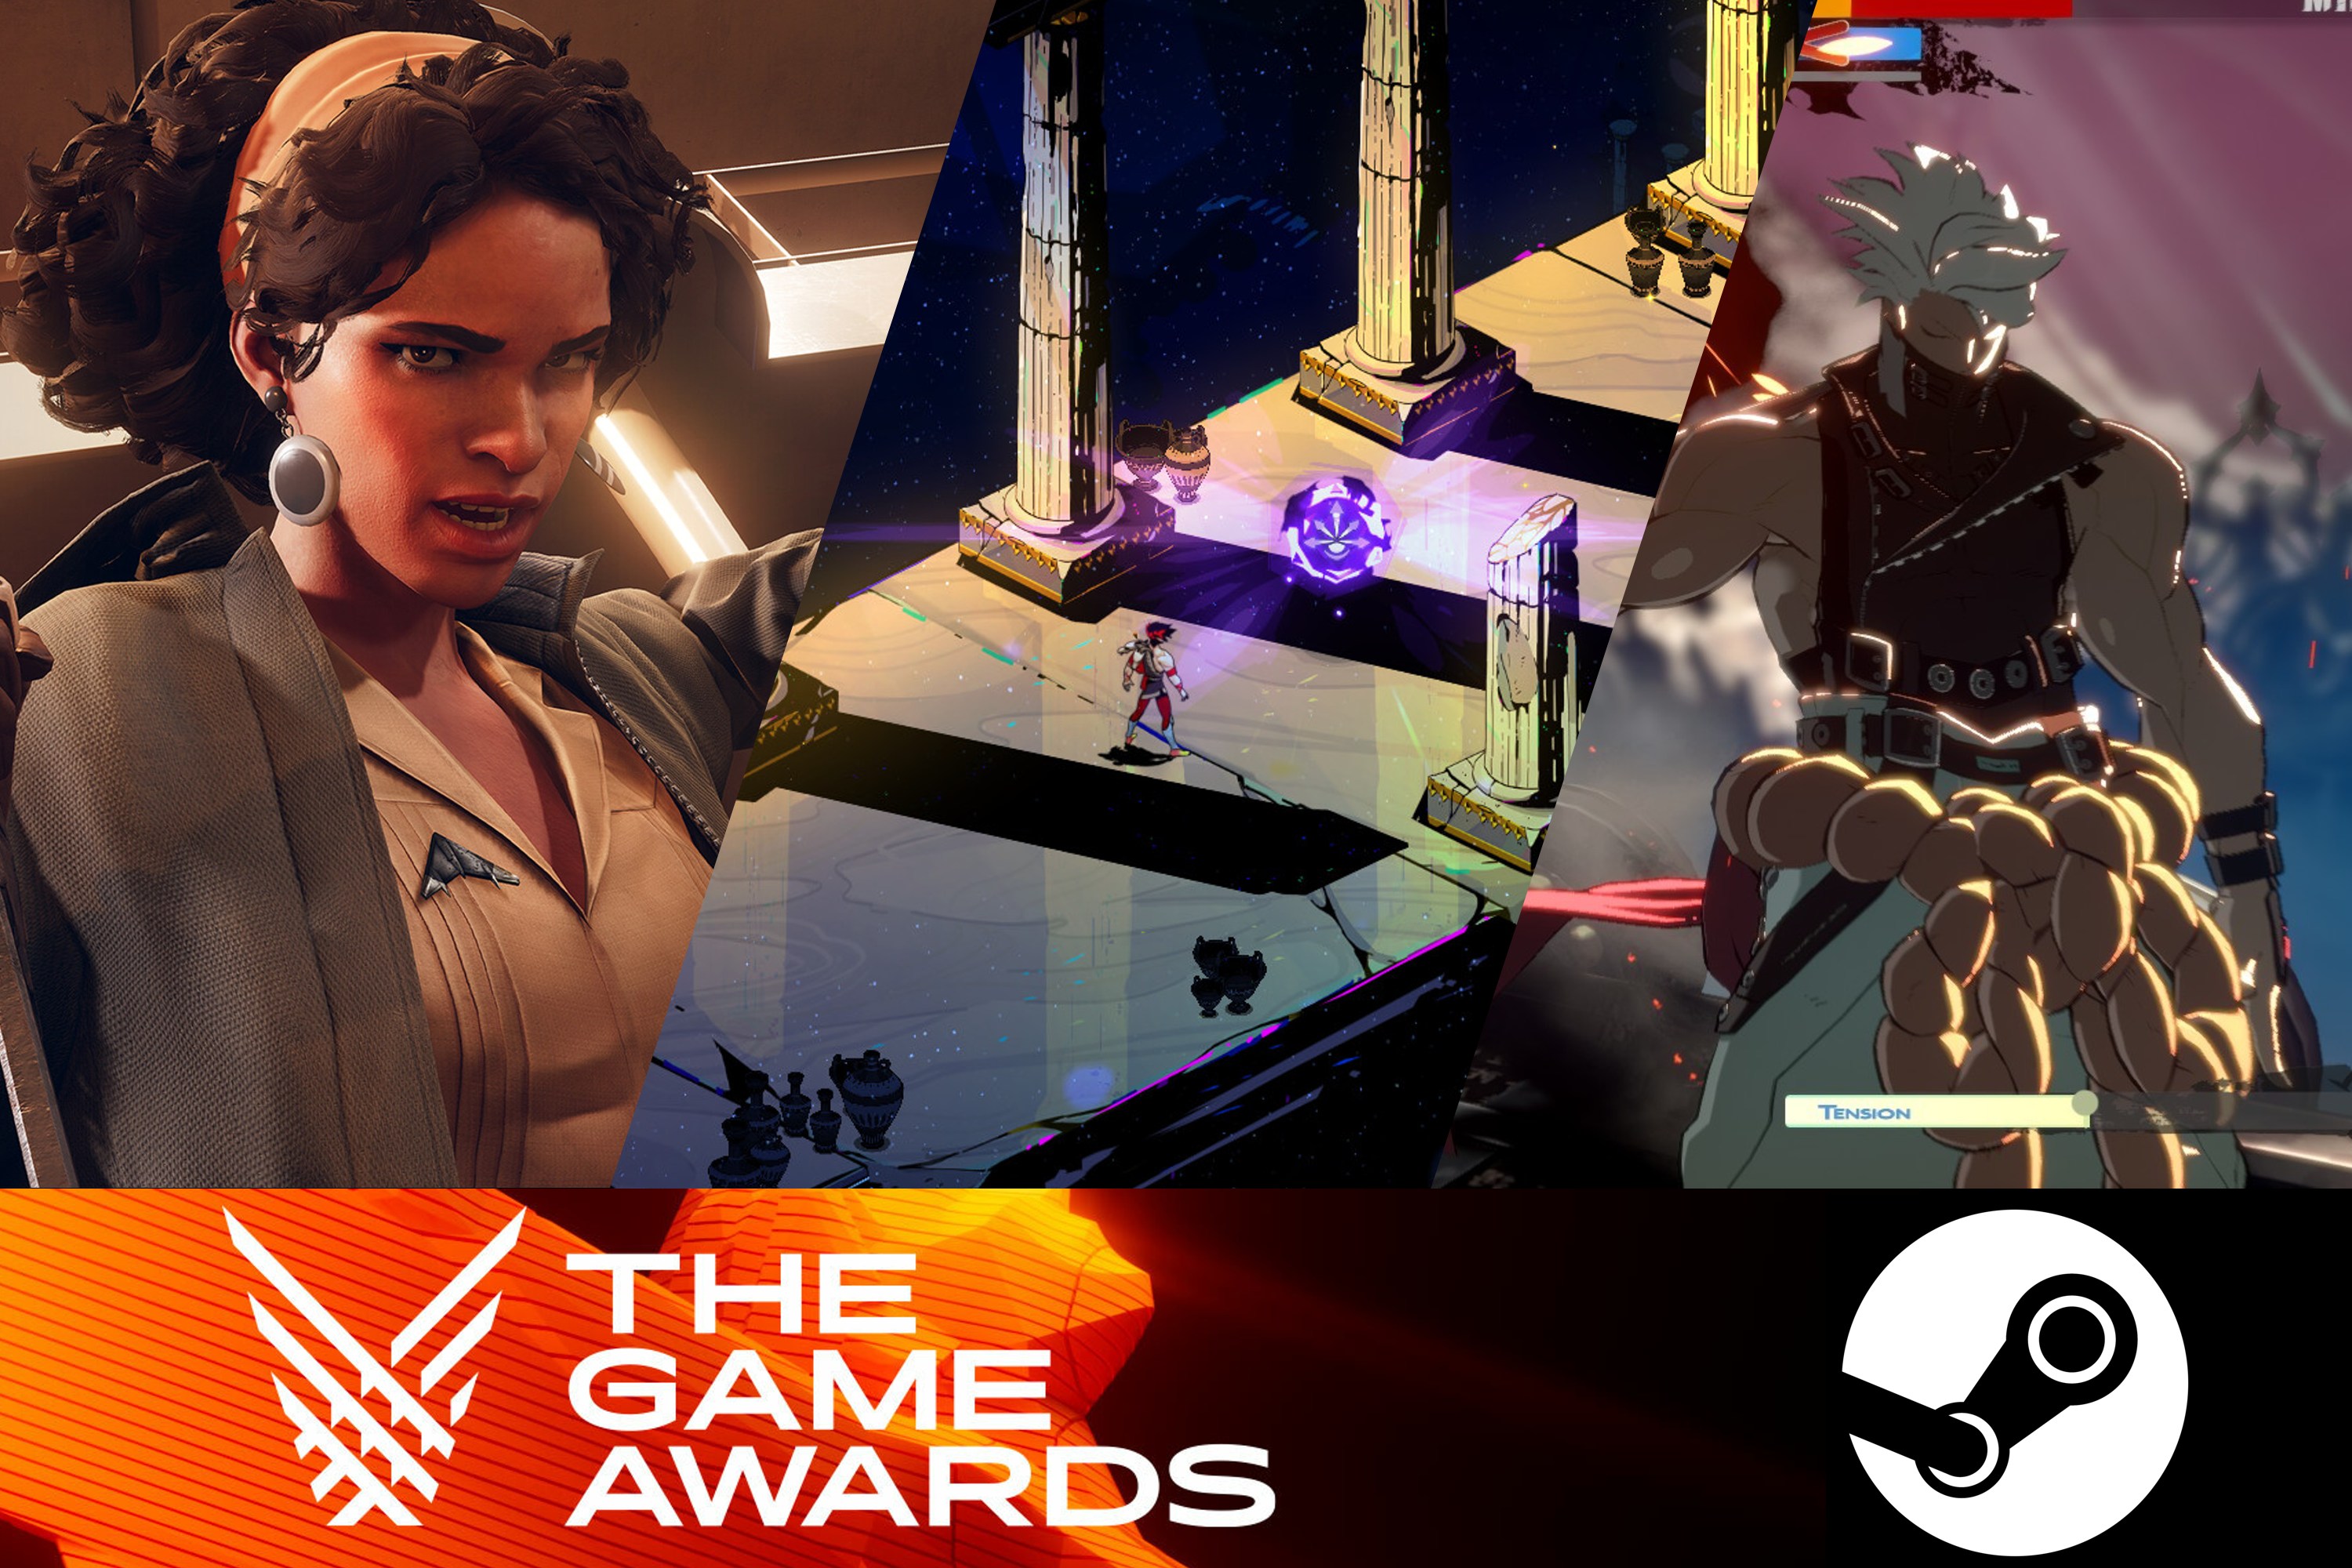 Steam Awards 2022 Winners - The Game of the Year is